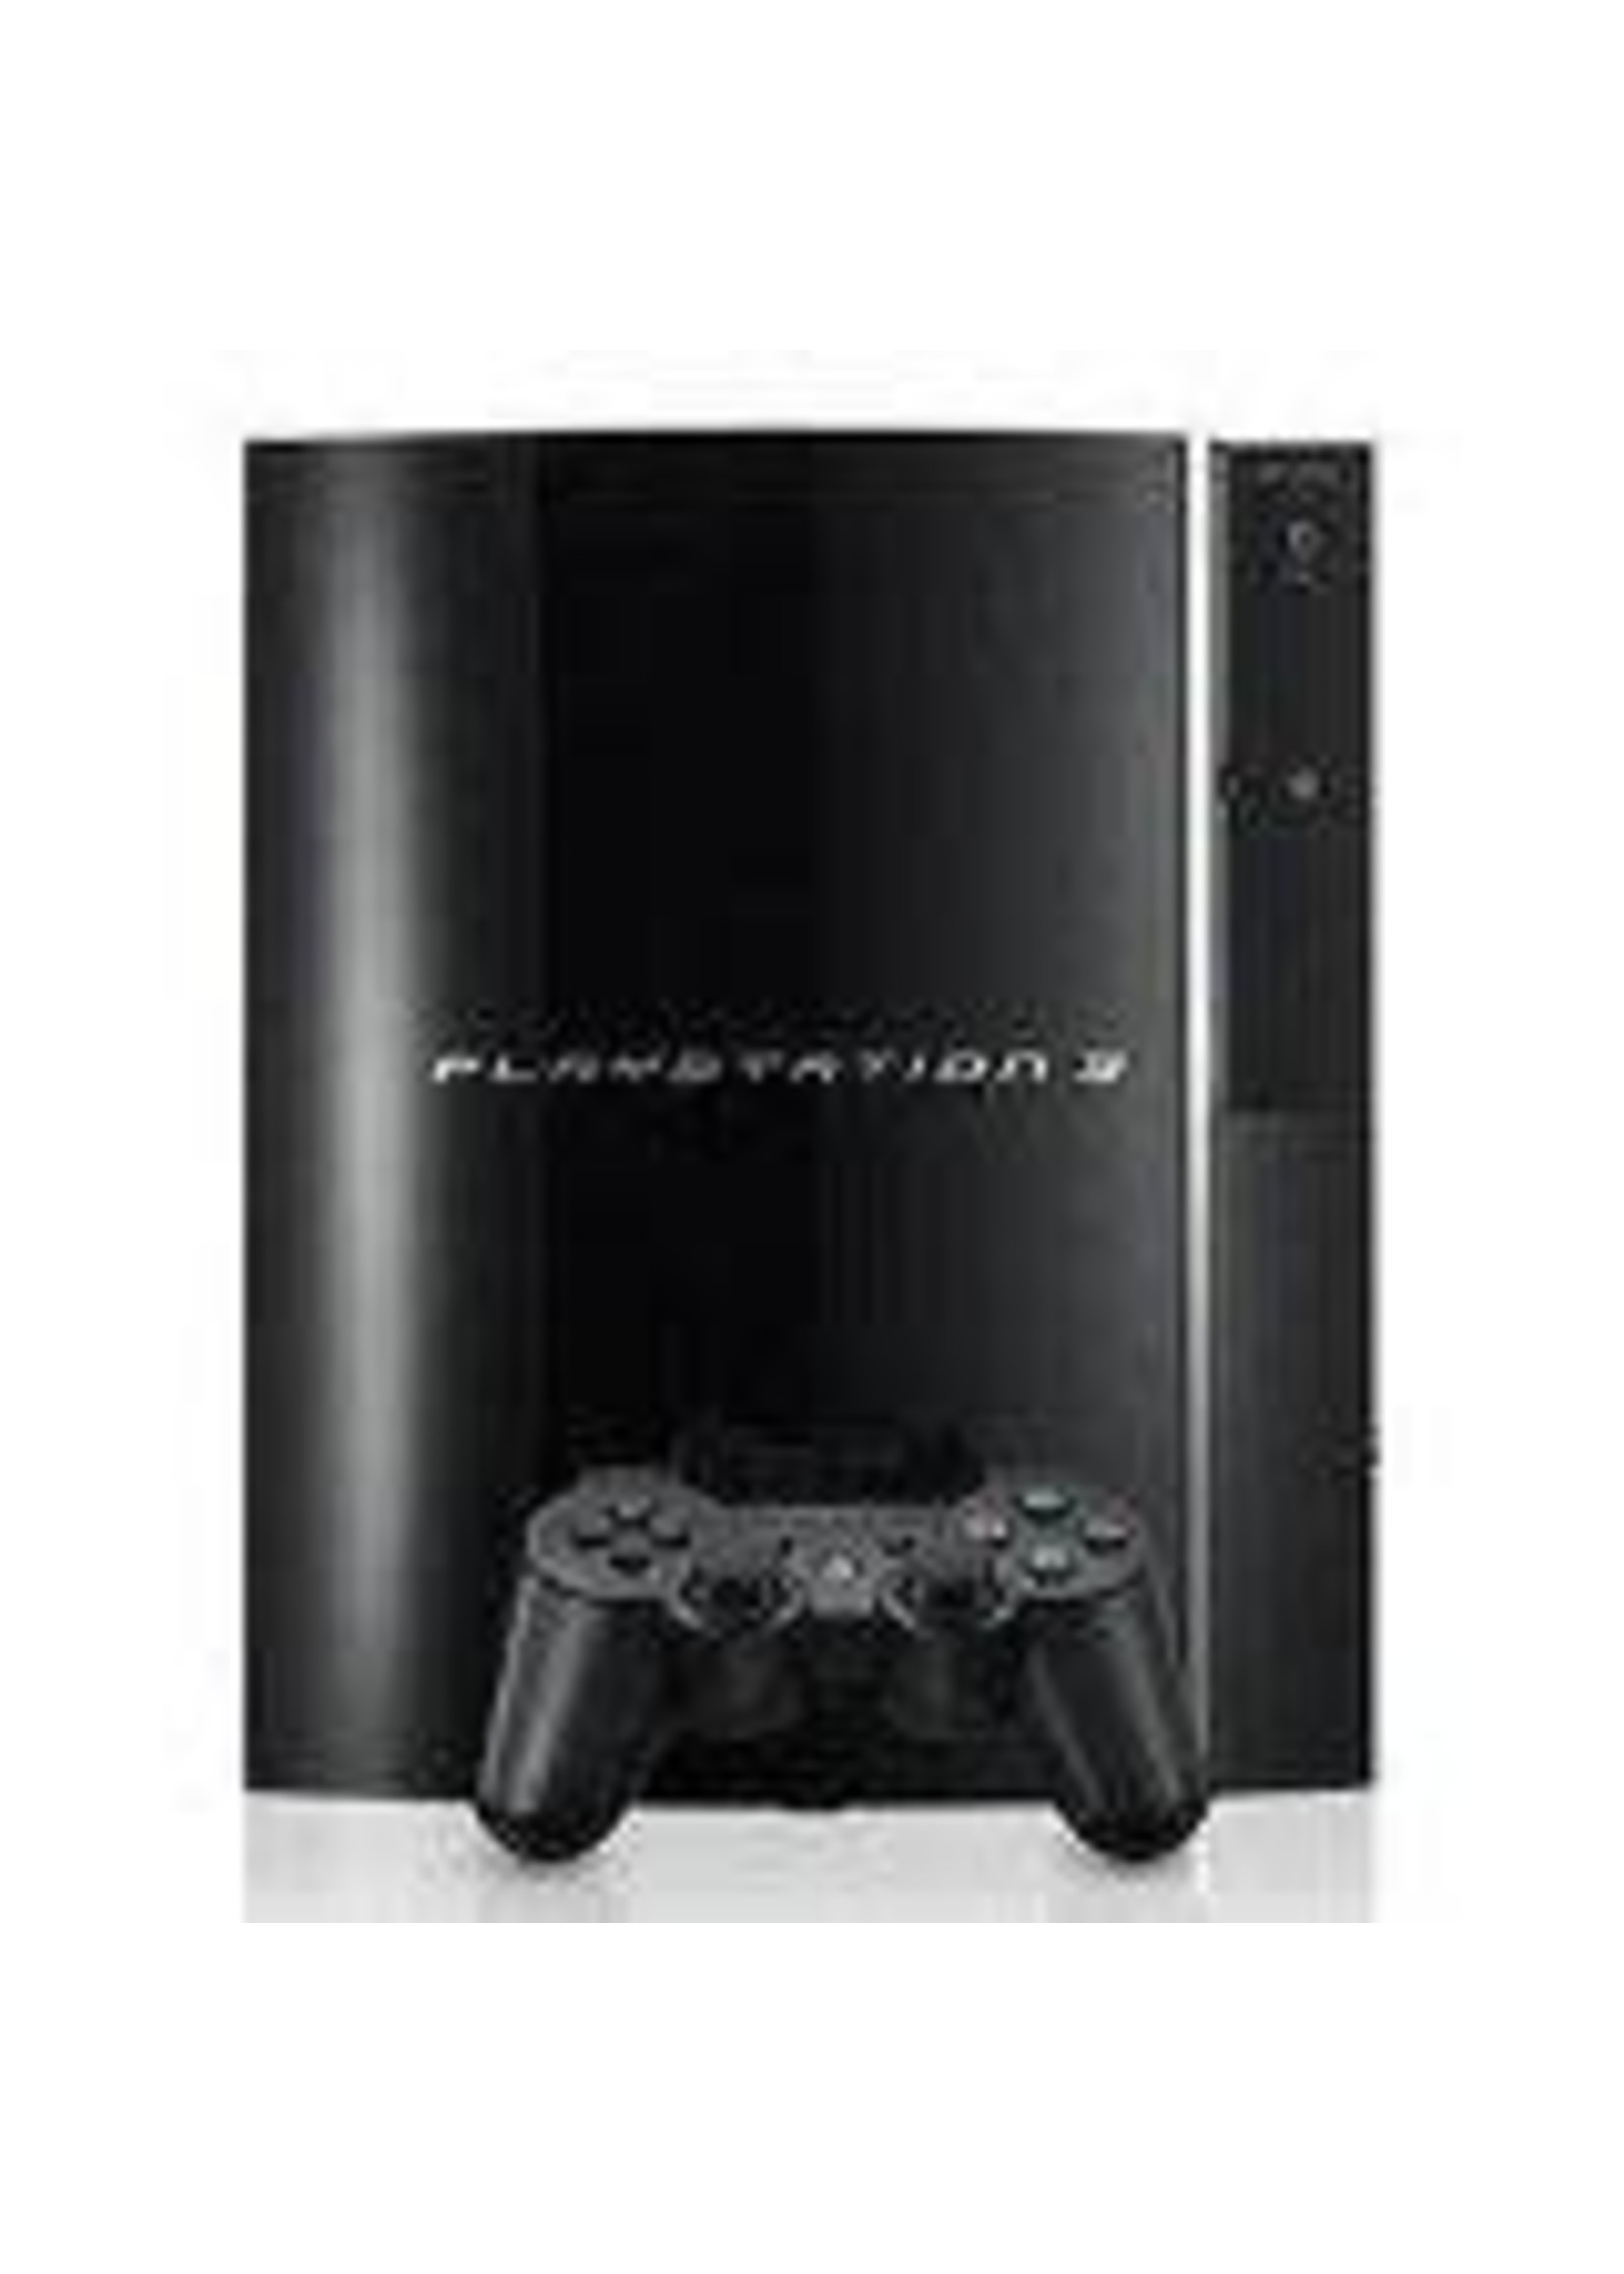 Playstation 3 Fat 60GB CECHE01 PS3 PS2 PS1 Backwards Compatible Console